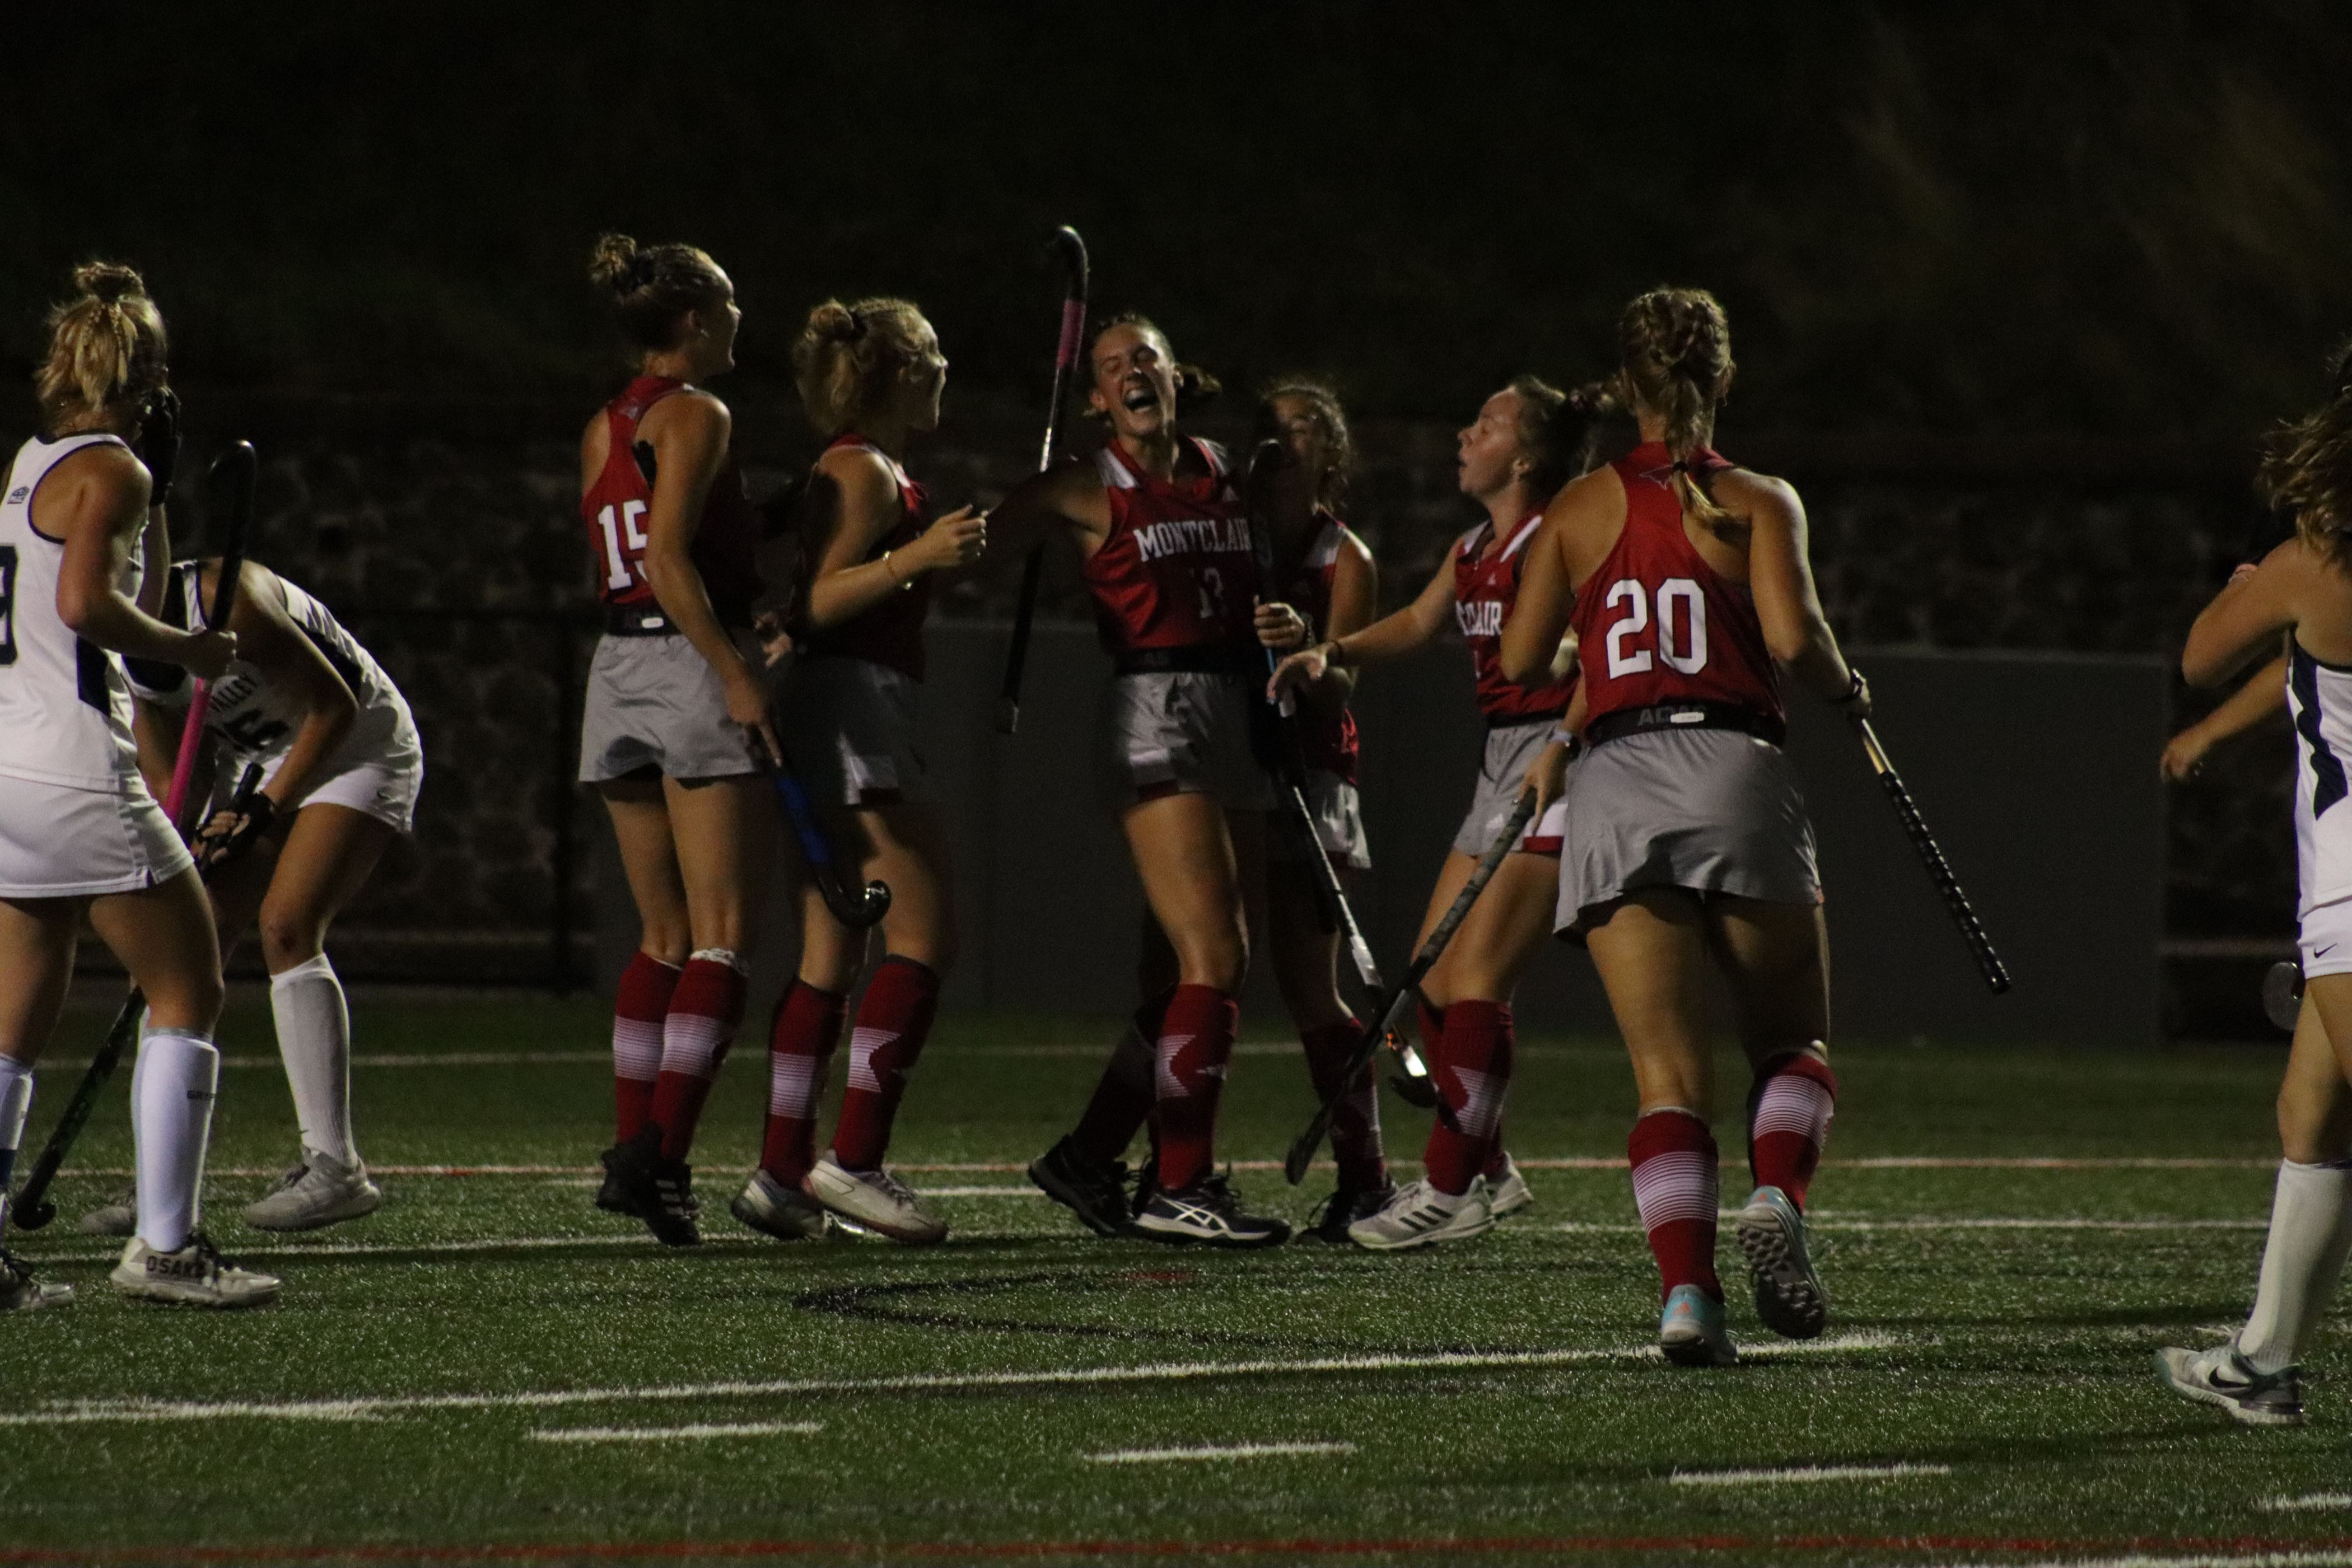 Junior midfielder Kylie Compton showing the emotions after scoring early on. Photo courtesy of Trevor Giesberg